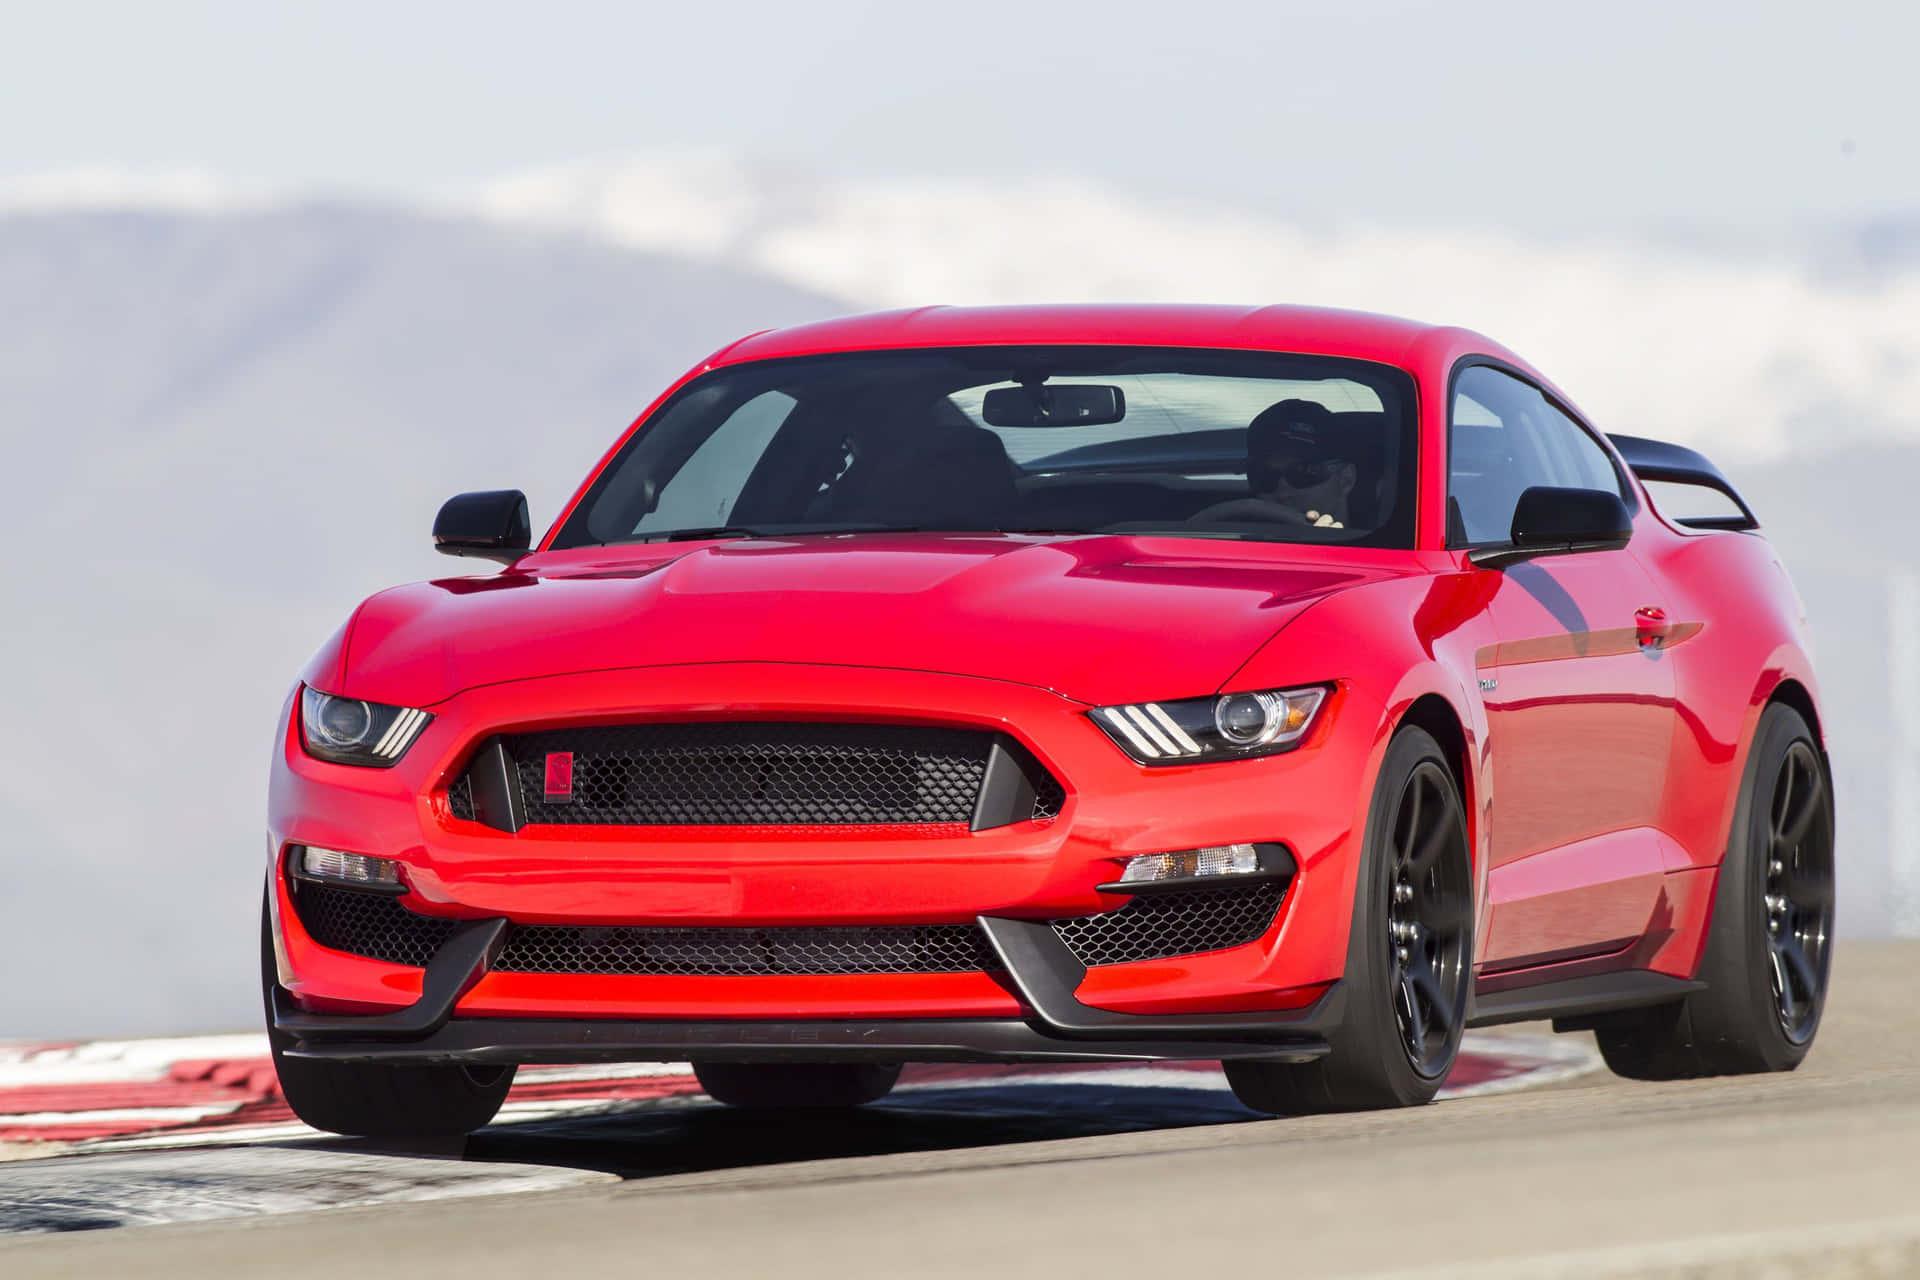 Stunning Ford Mustang Shelby GT350 in action Wallpaper